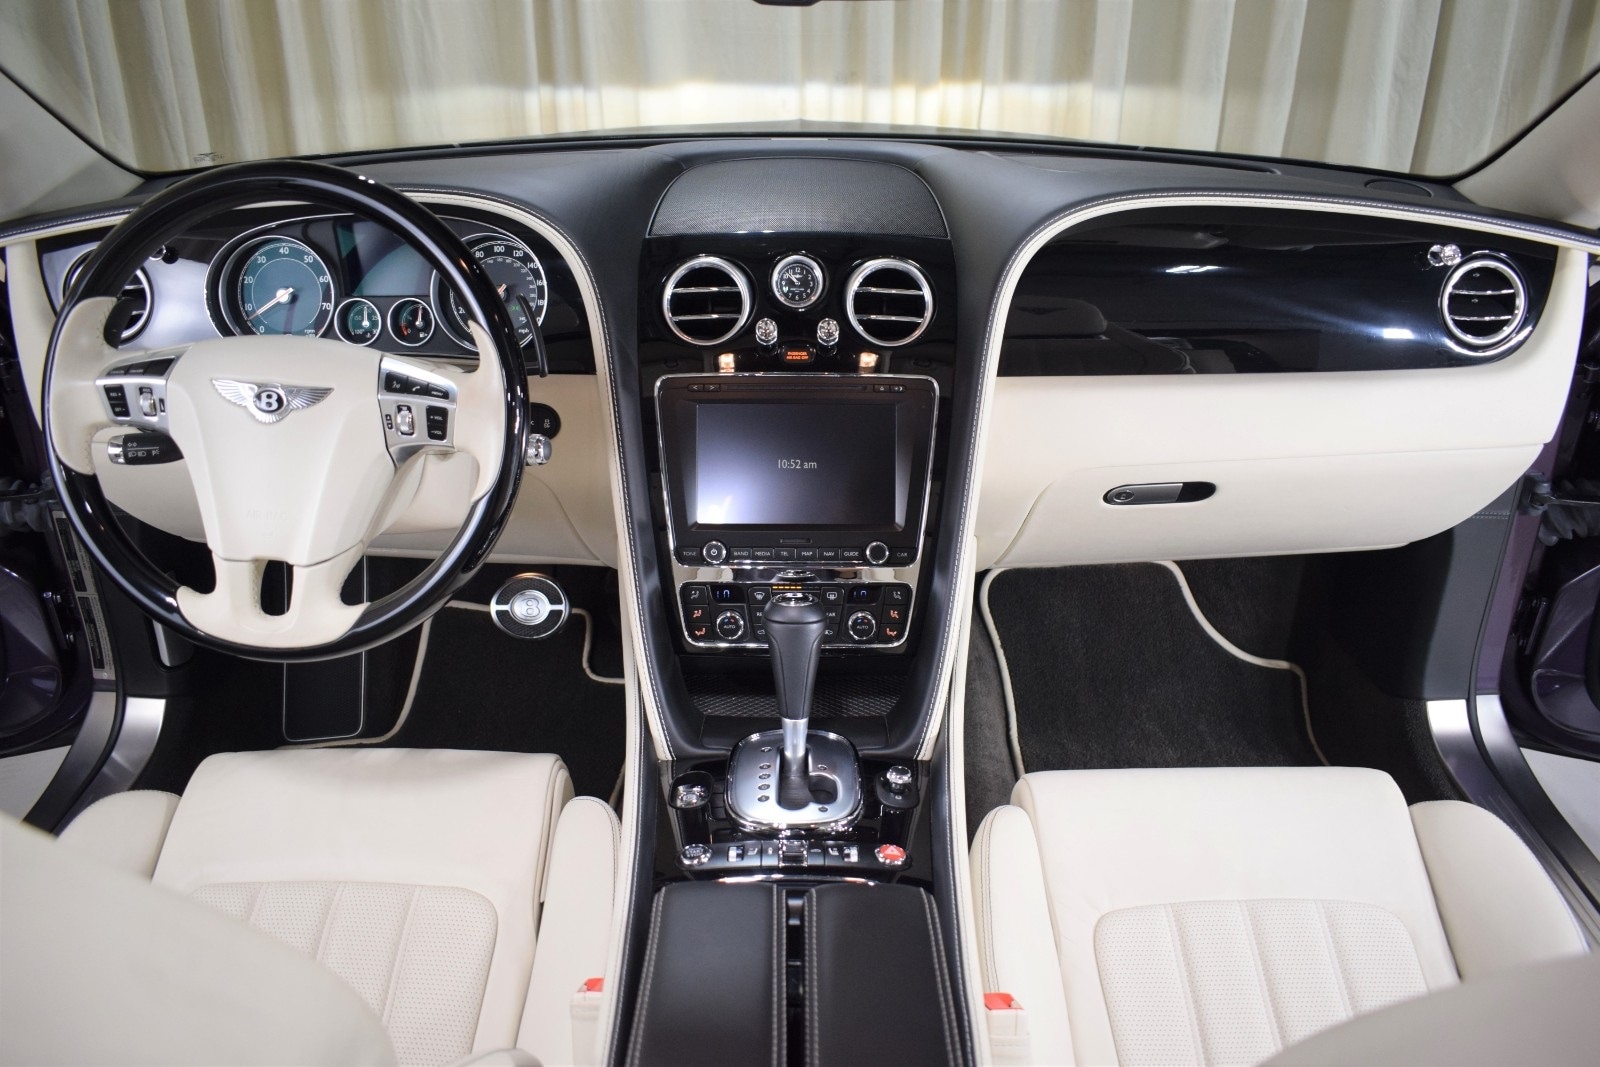 Used 2013 Bentley Continental GTC Base with VIN SCBGR3ZA1DC080370 for sale in Troy, MI